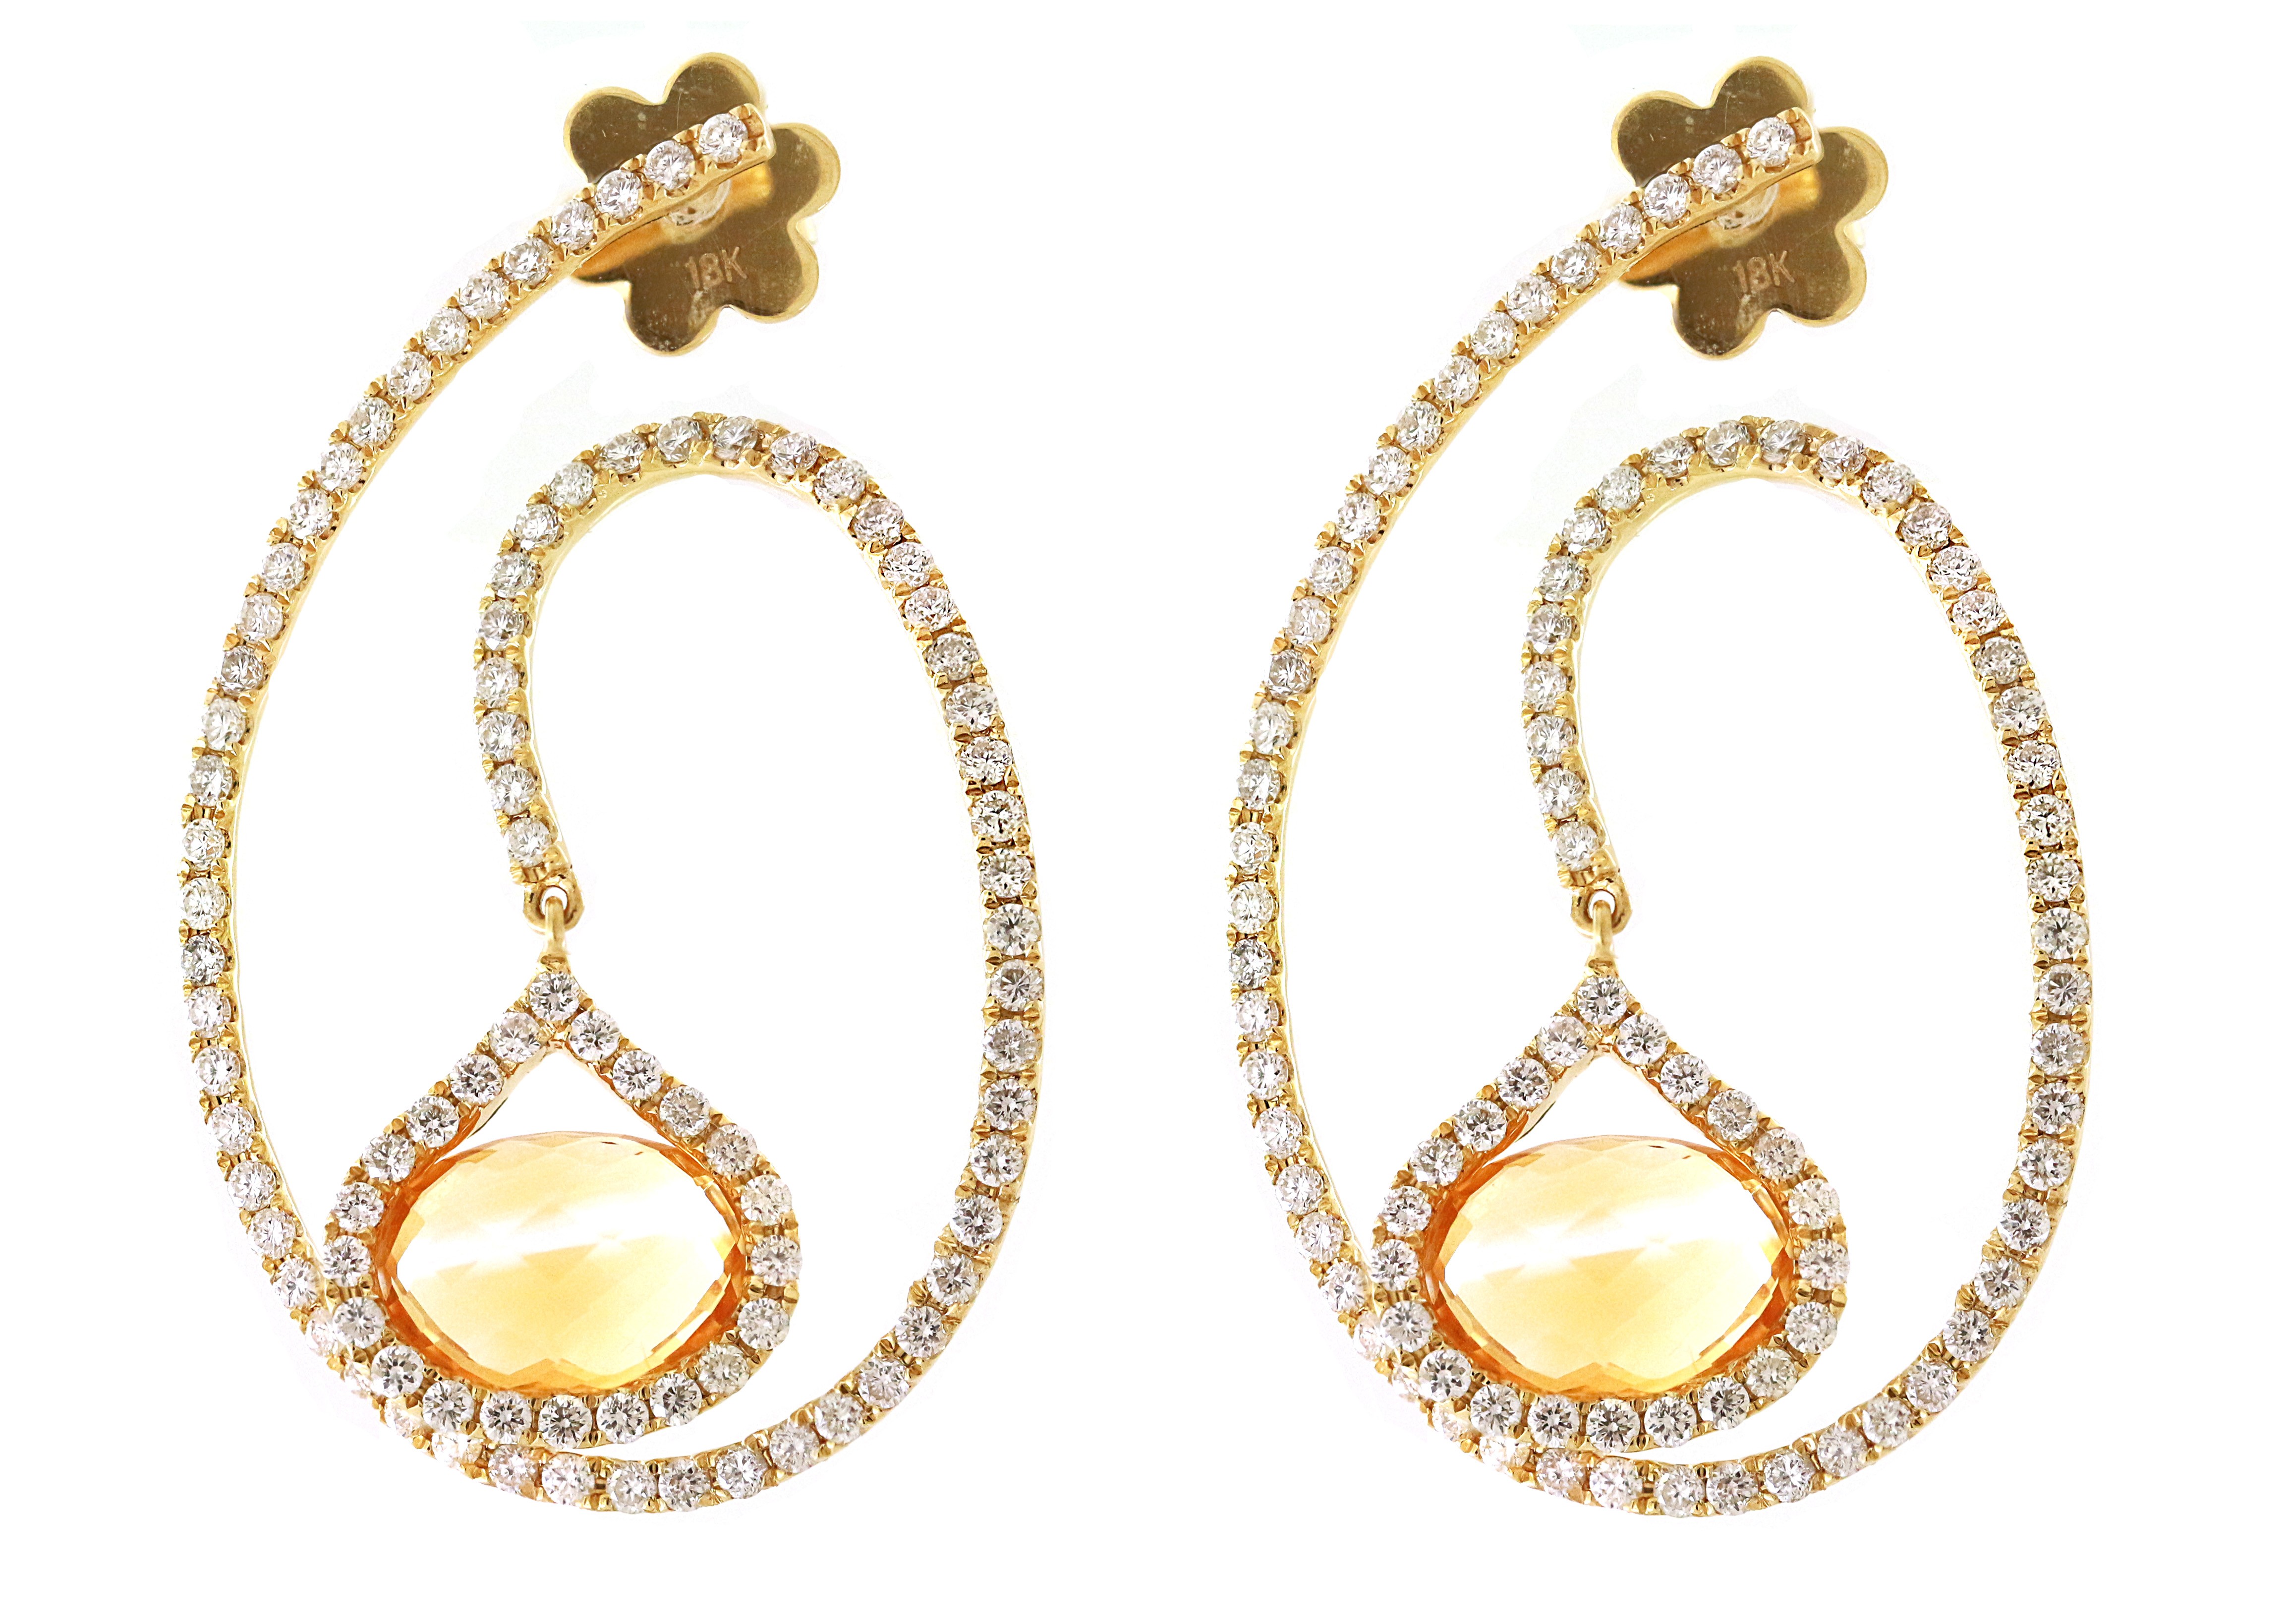 18kt Yellow Gold Diamond and Citrine Dangling Earrings